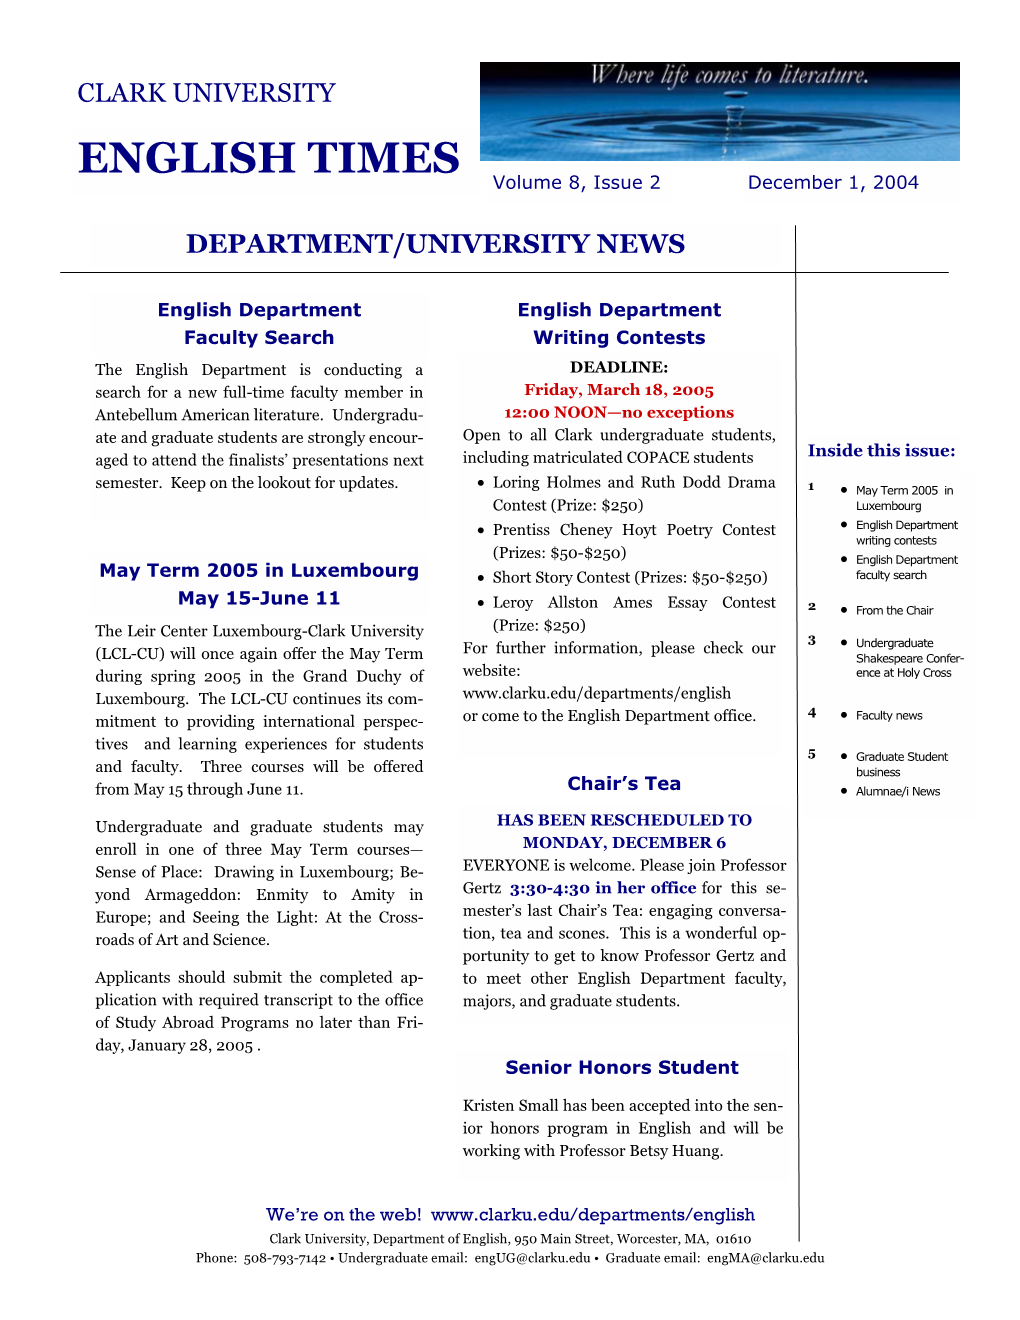 ENGLISH TIMES Volume 8, Issue 2 December 1, 2004